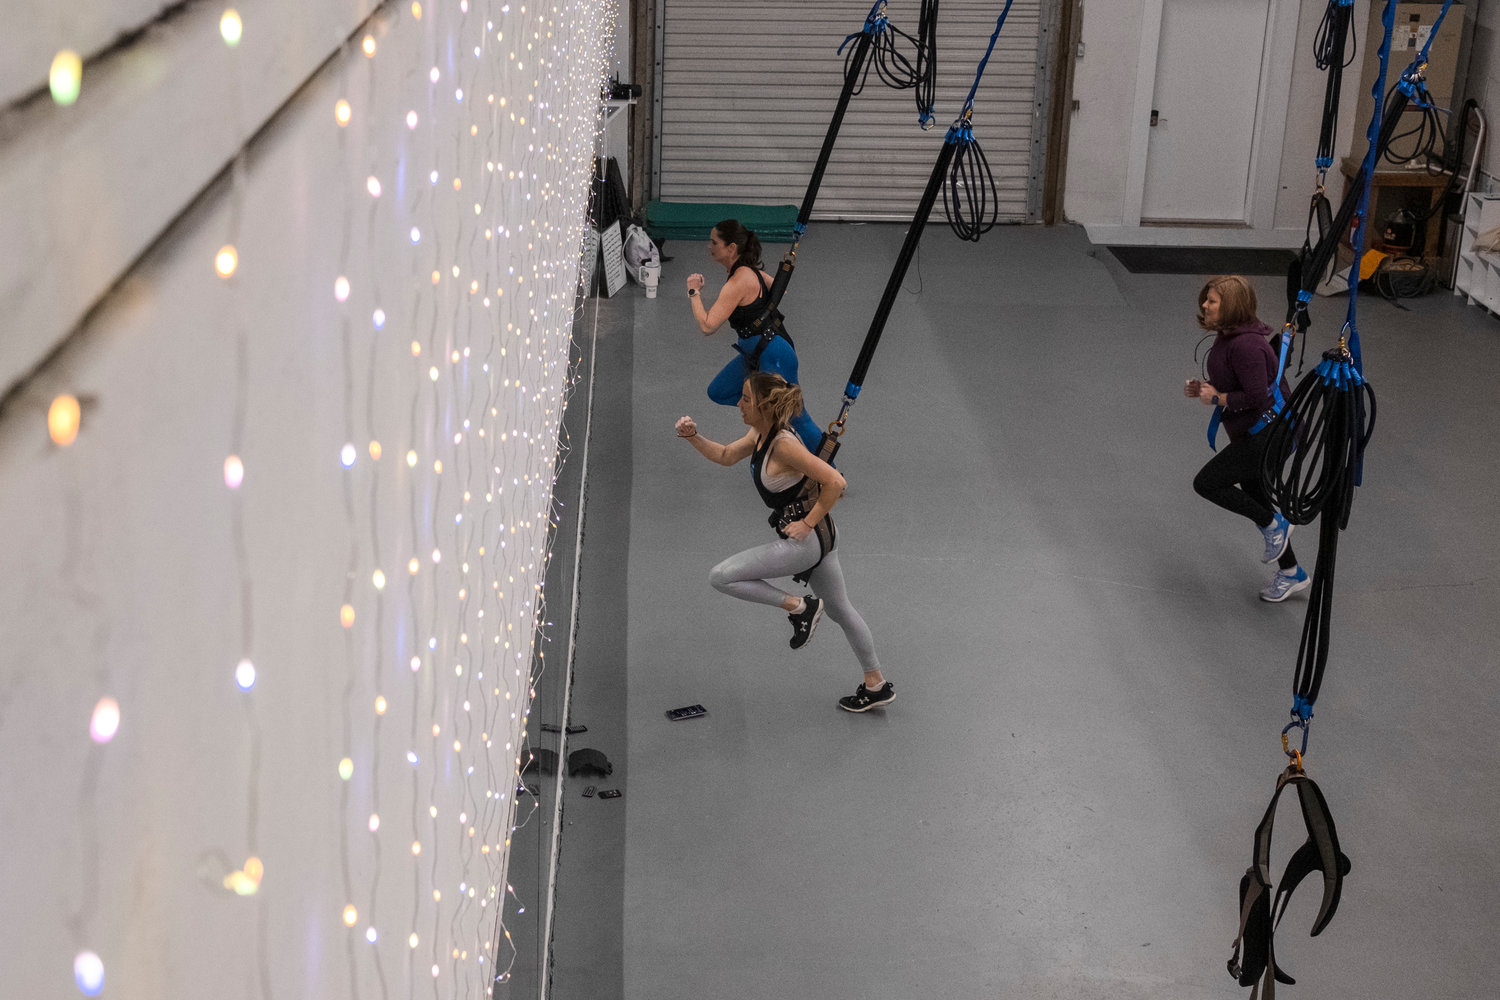 Jessica Watkins, owner of FIT Fairhope, leads Lauren Babcock and Melanie LeCroy in a Sling Bungee workout.